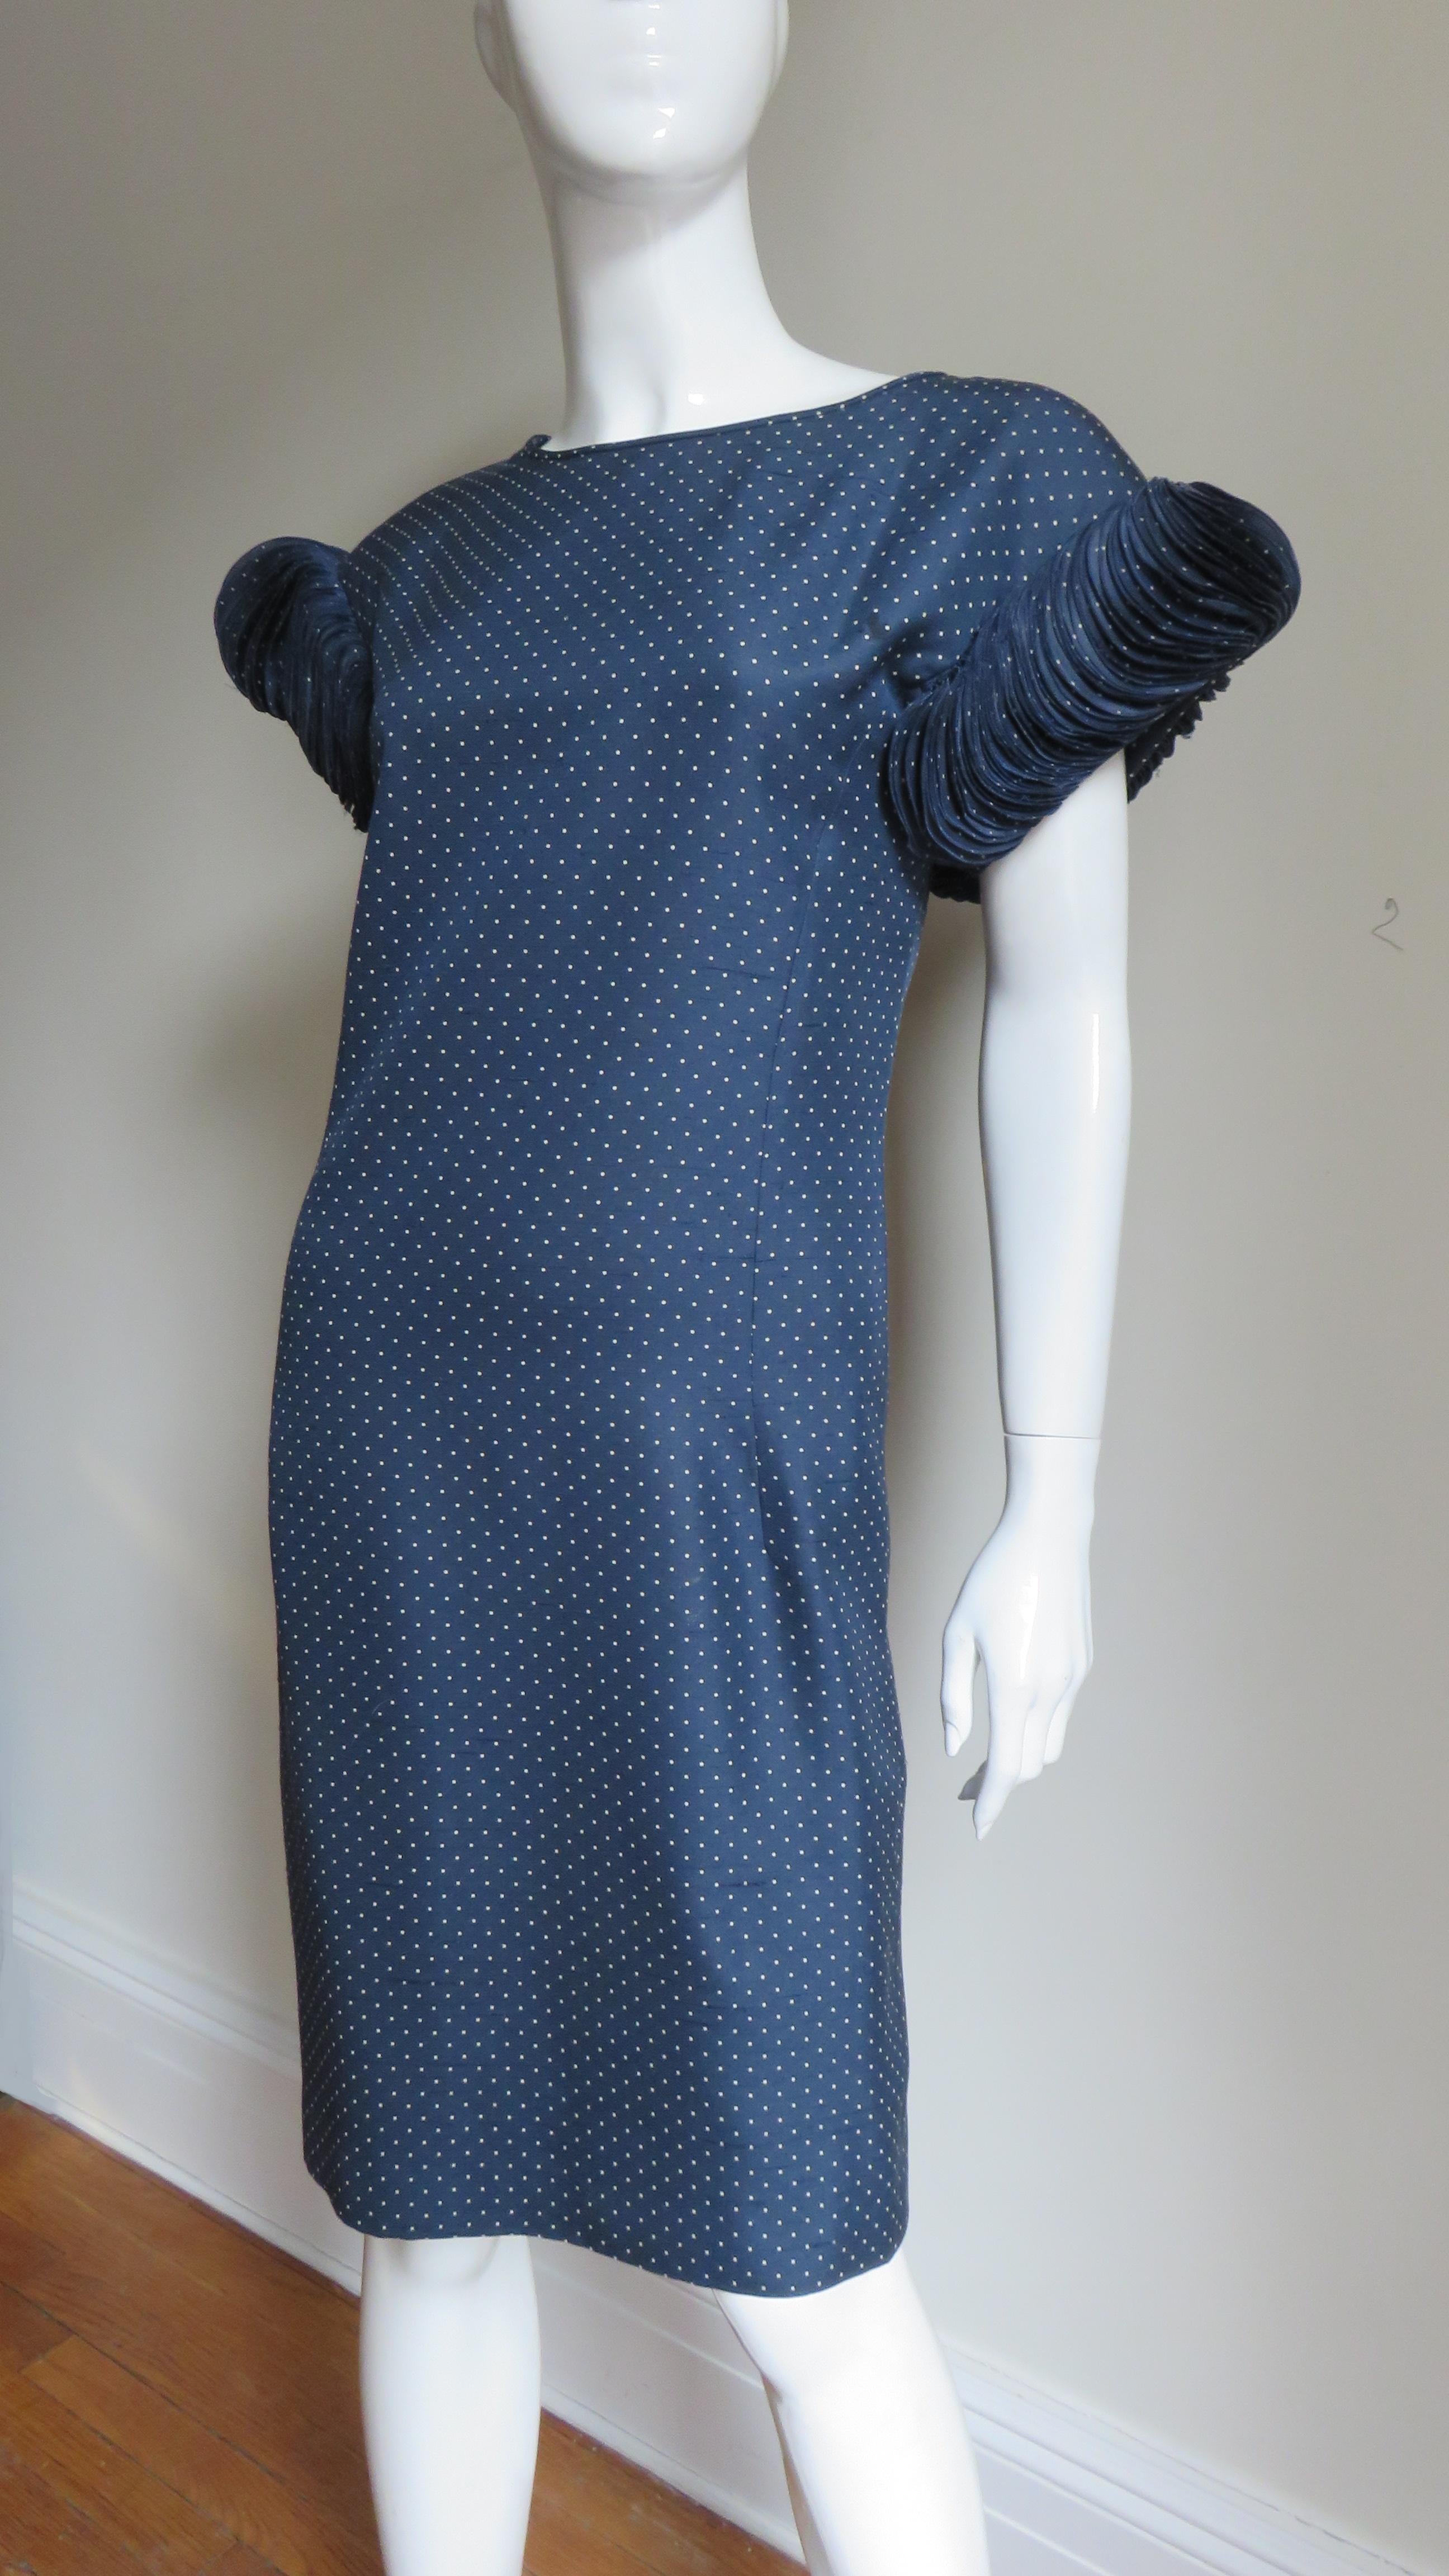 A fabulous navy silk dress with tiny white dots dress from Valentino.  The cap sleeves are incredible, the ends of them encircled with several 100 finished circles adding dimension and movement.  Such an immense amount of work.  The dress skims the